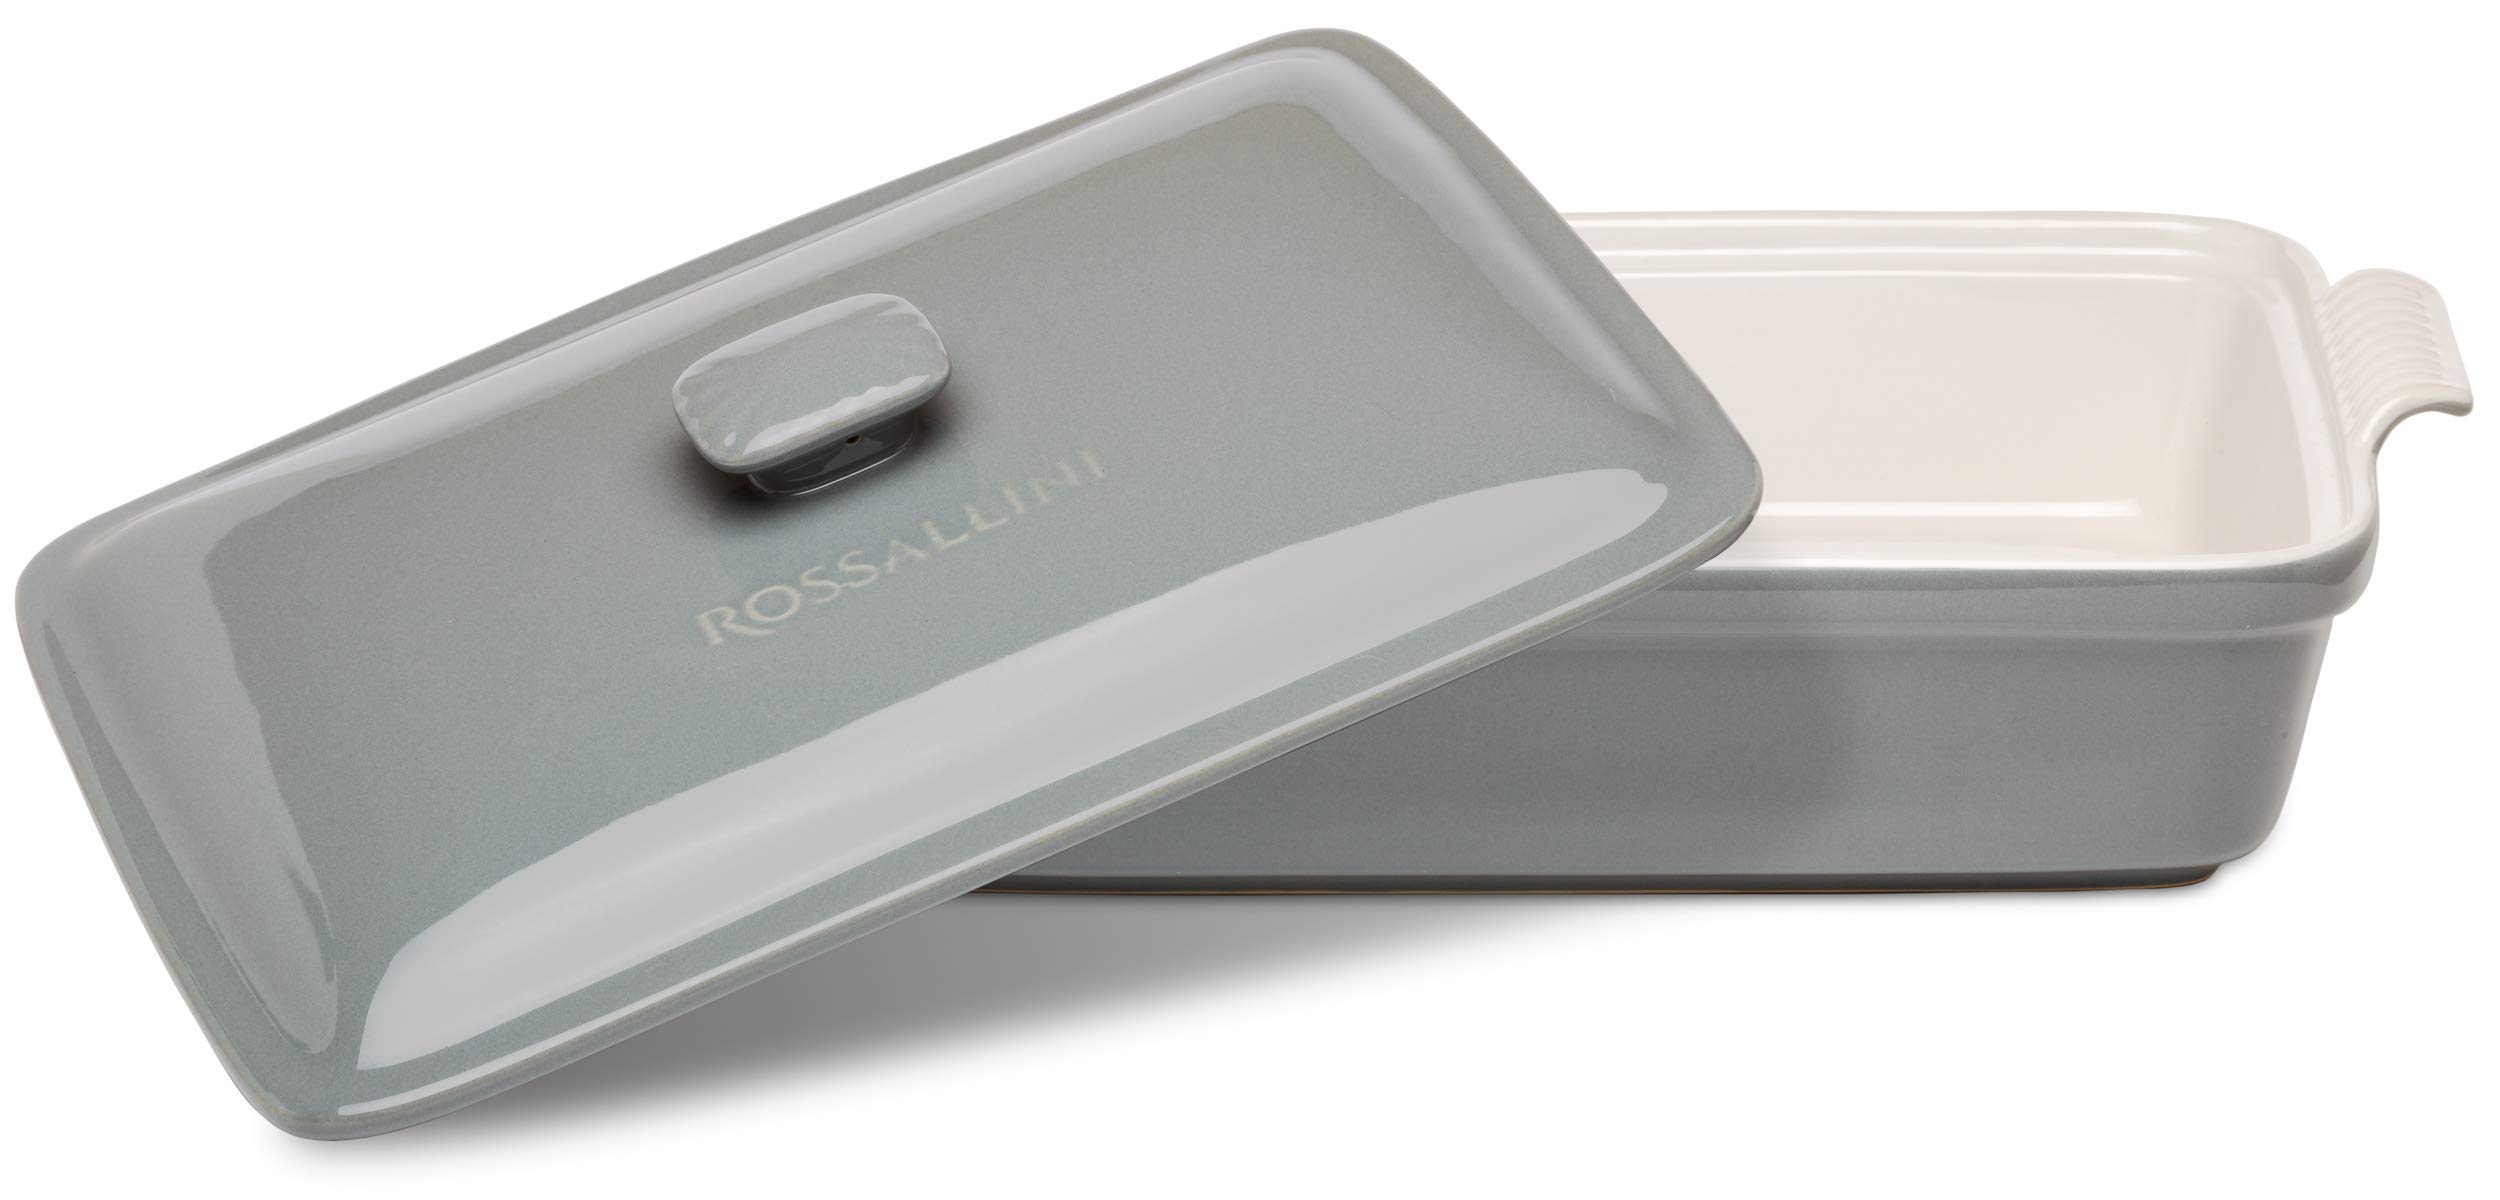 ROSSALLINI Stoneware Casserole Dish Bakeware Set with Lid, Covered Rectangular Dinnerware, Extra Large 4.23 Quart, 13 by 9 Inch, Grigio [Grey]